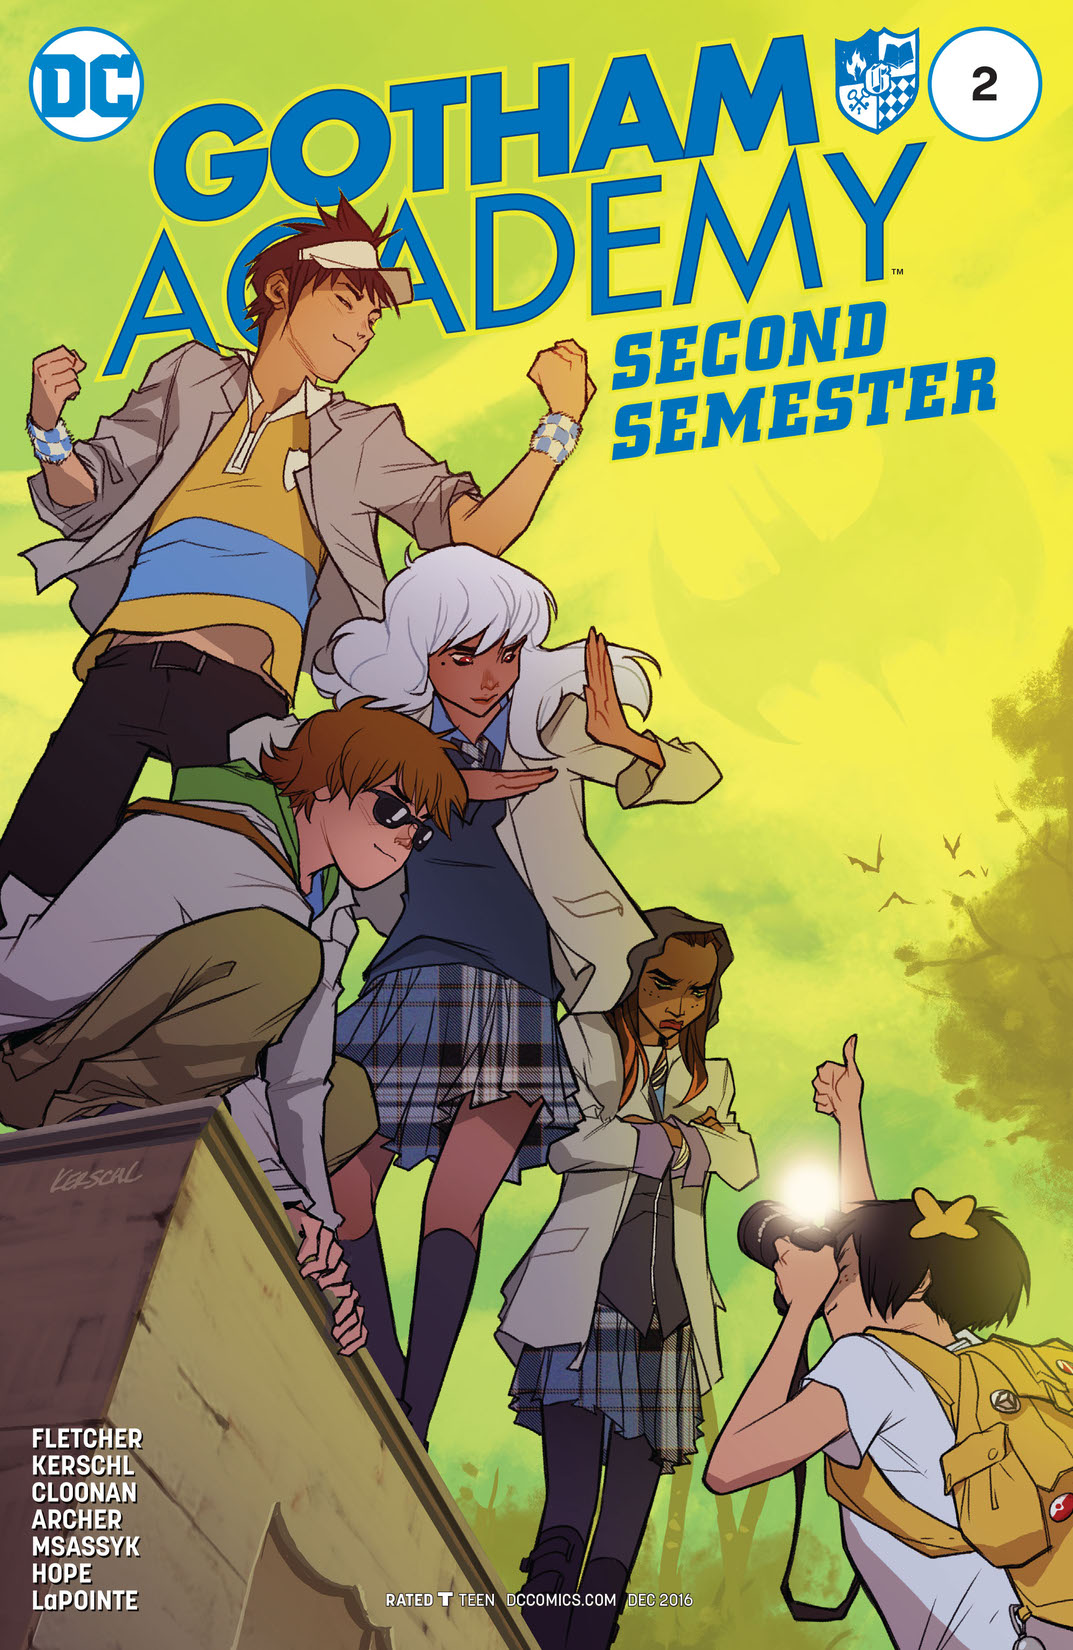 Gotham Academy: Second Semester #2 preview images